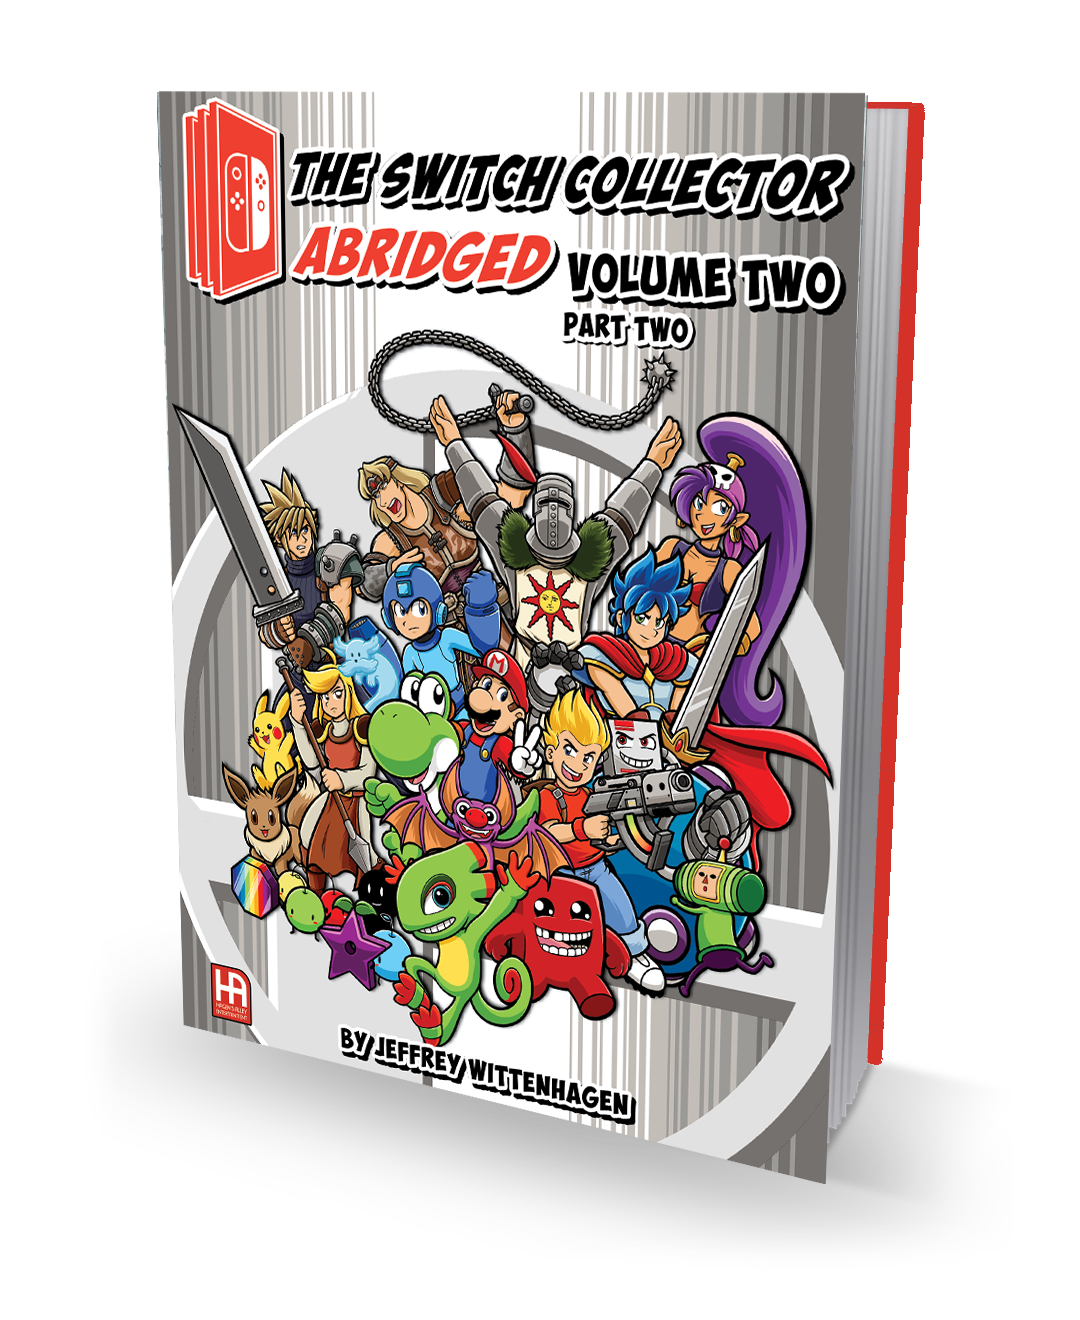 The Switch Collector Abridged: Year Two (Part Two) - Hardcover Book (Preorder)